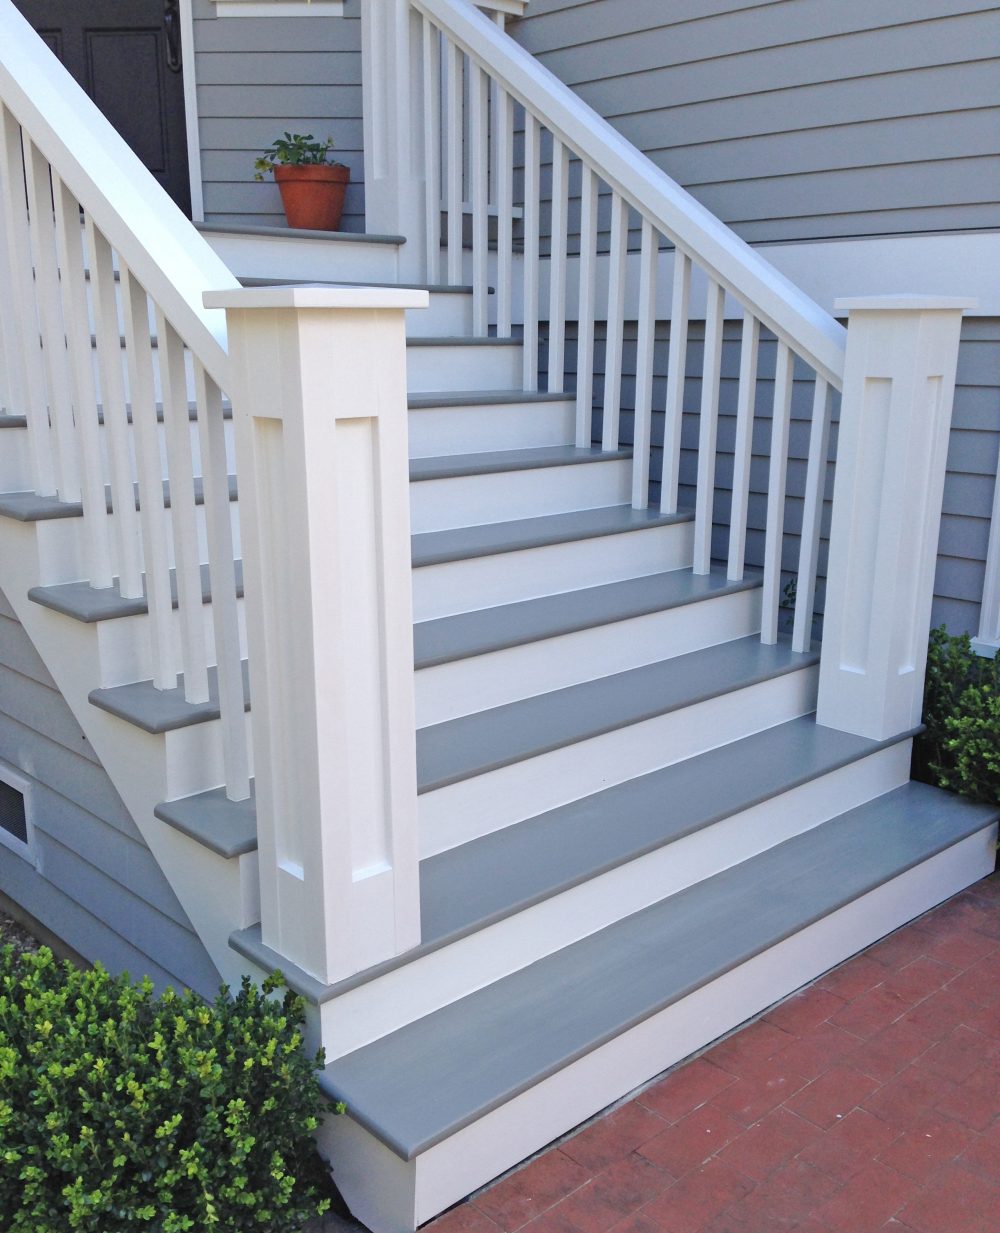 Side view of 10 wooden steps painted white and grey with heavy posts and vertical wood slats leading up to the front door